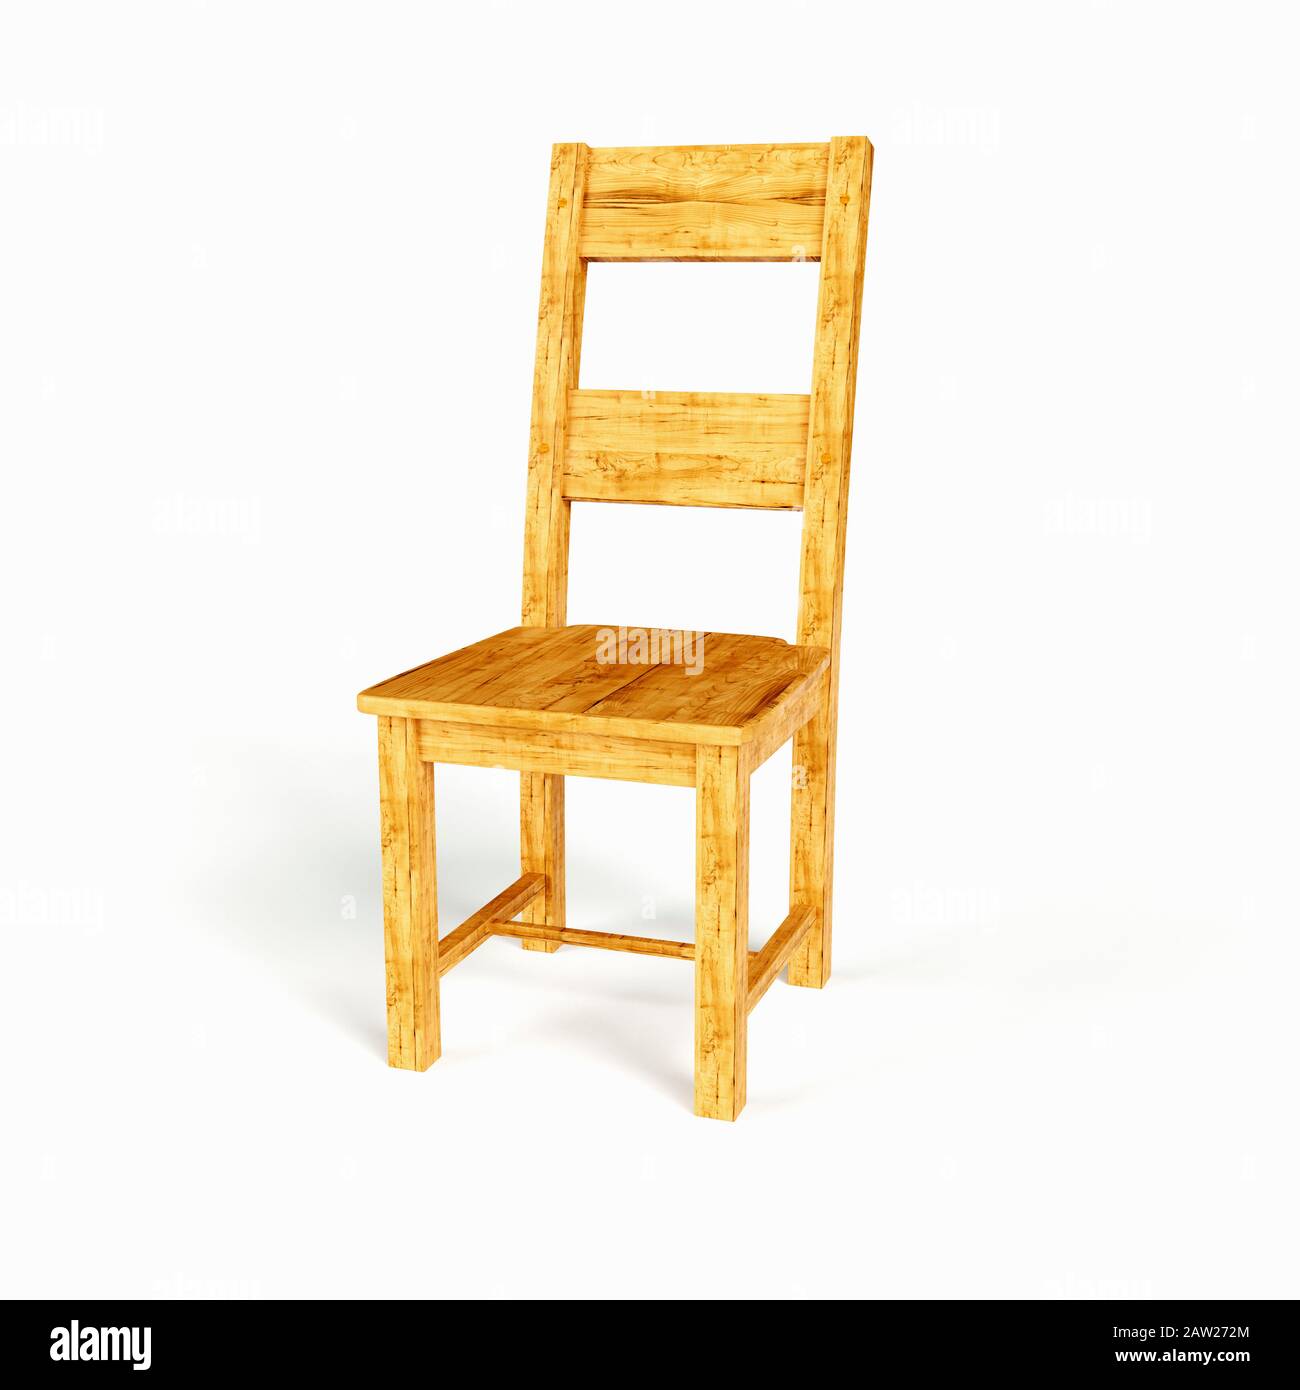 Wooden dining chair on a white background Stock Photo